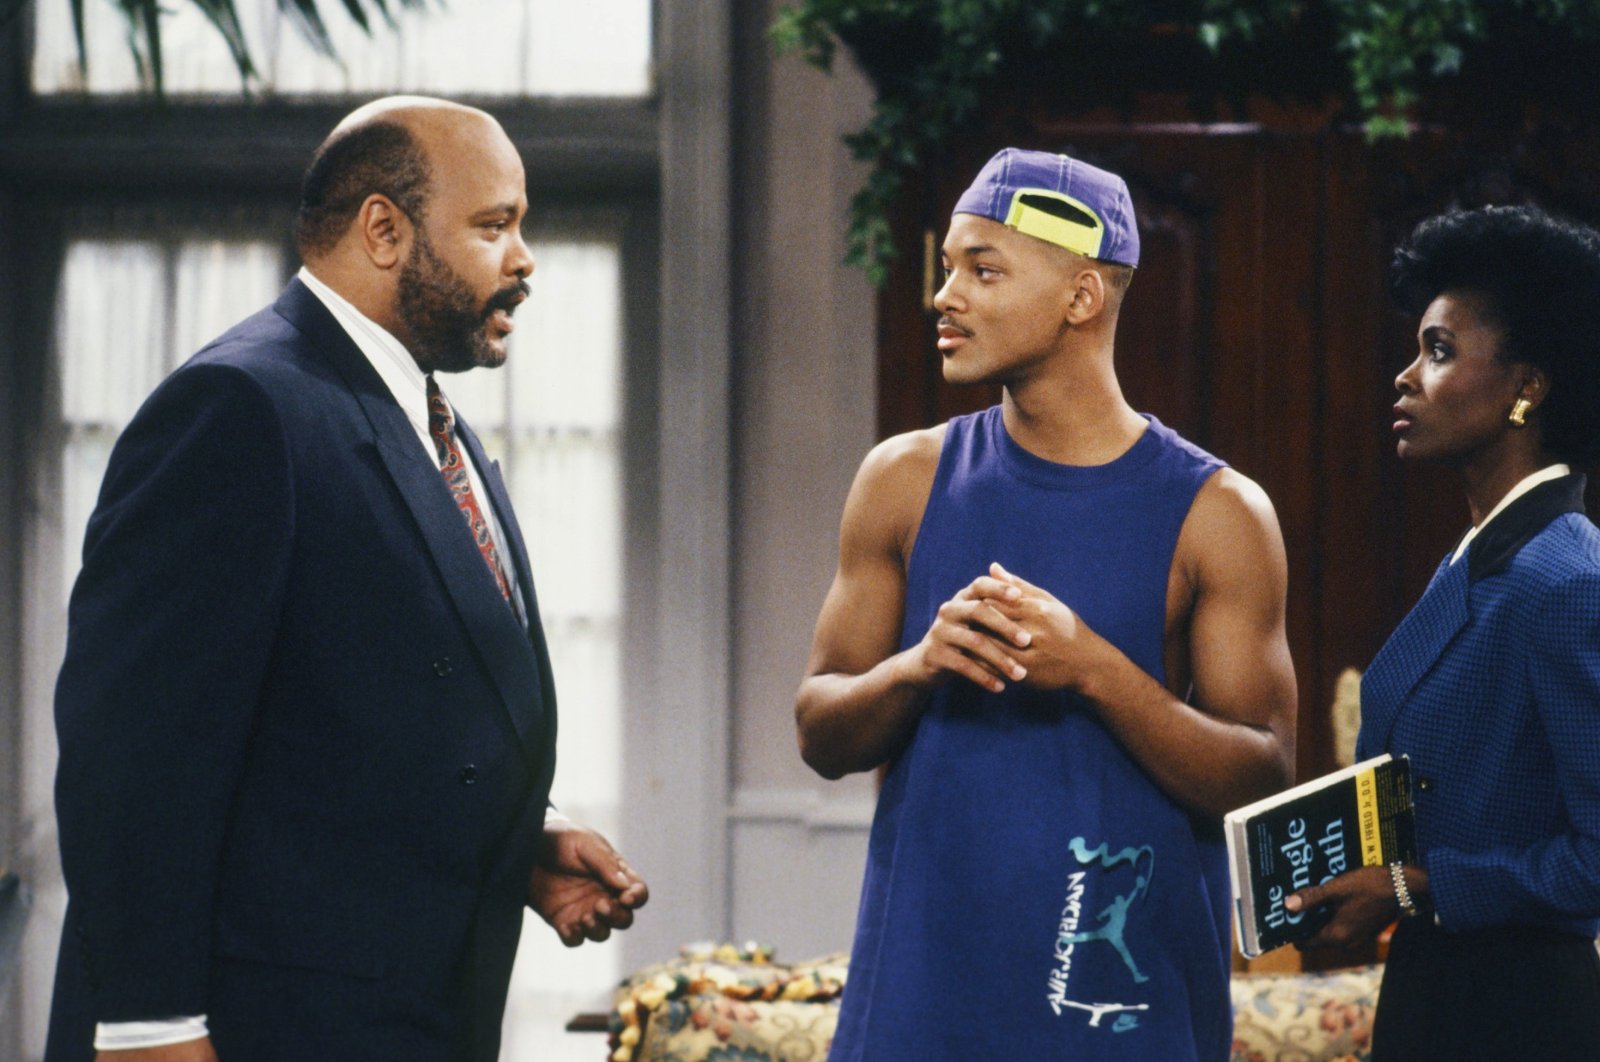 This photo provided by NBC shows (L-R) James Avery as Philip Banks, Will Smith as William "Will" Smith, and Janet Hubert as Vivian Banks, in Episode 7, "Def Poet's Society" from the TV series, "The Fresh Prince of Bel-Air." (AP PHOTO)